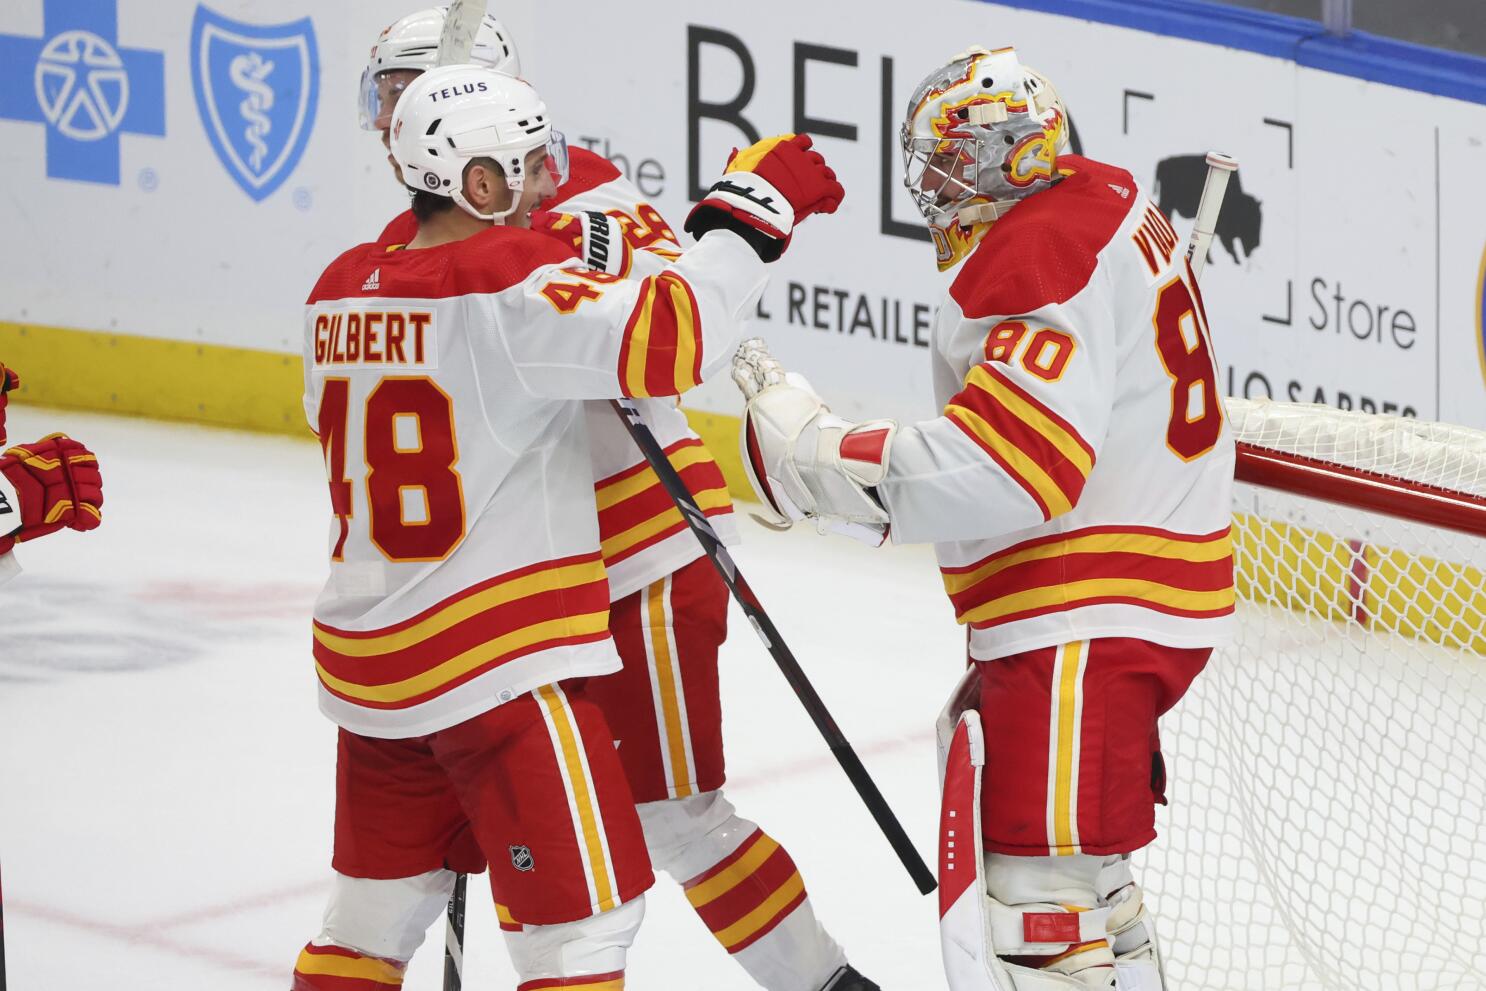 2022 Stanley Cup Playoffs Game 7 results: Flames and Rangers both